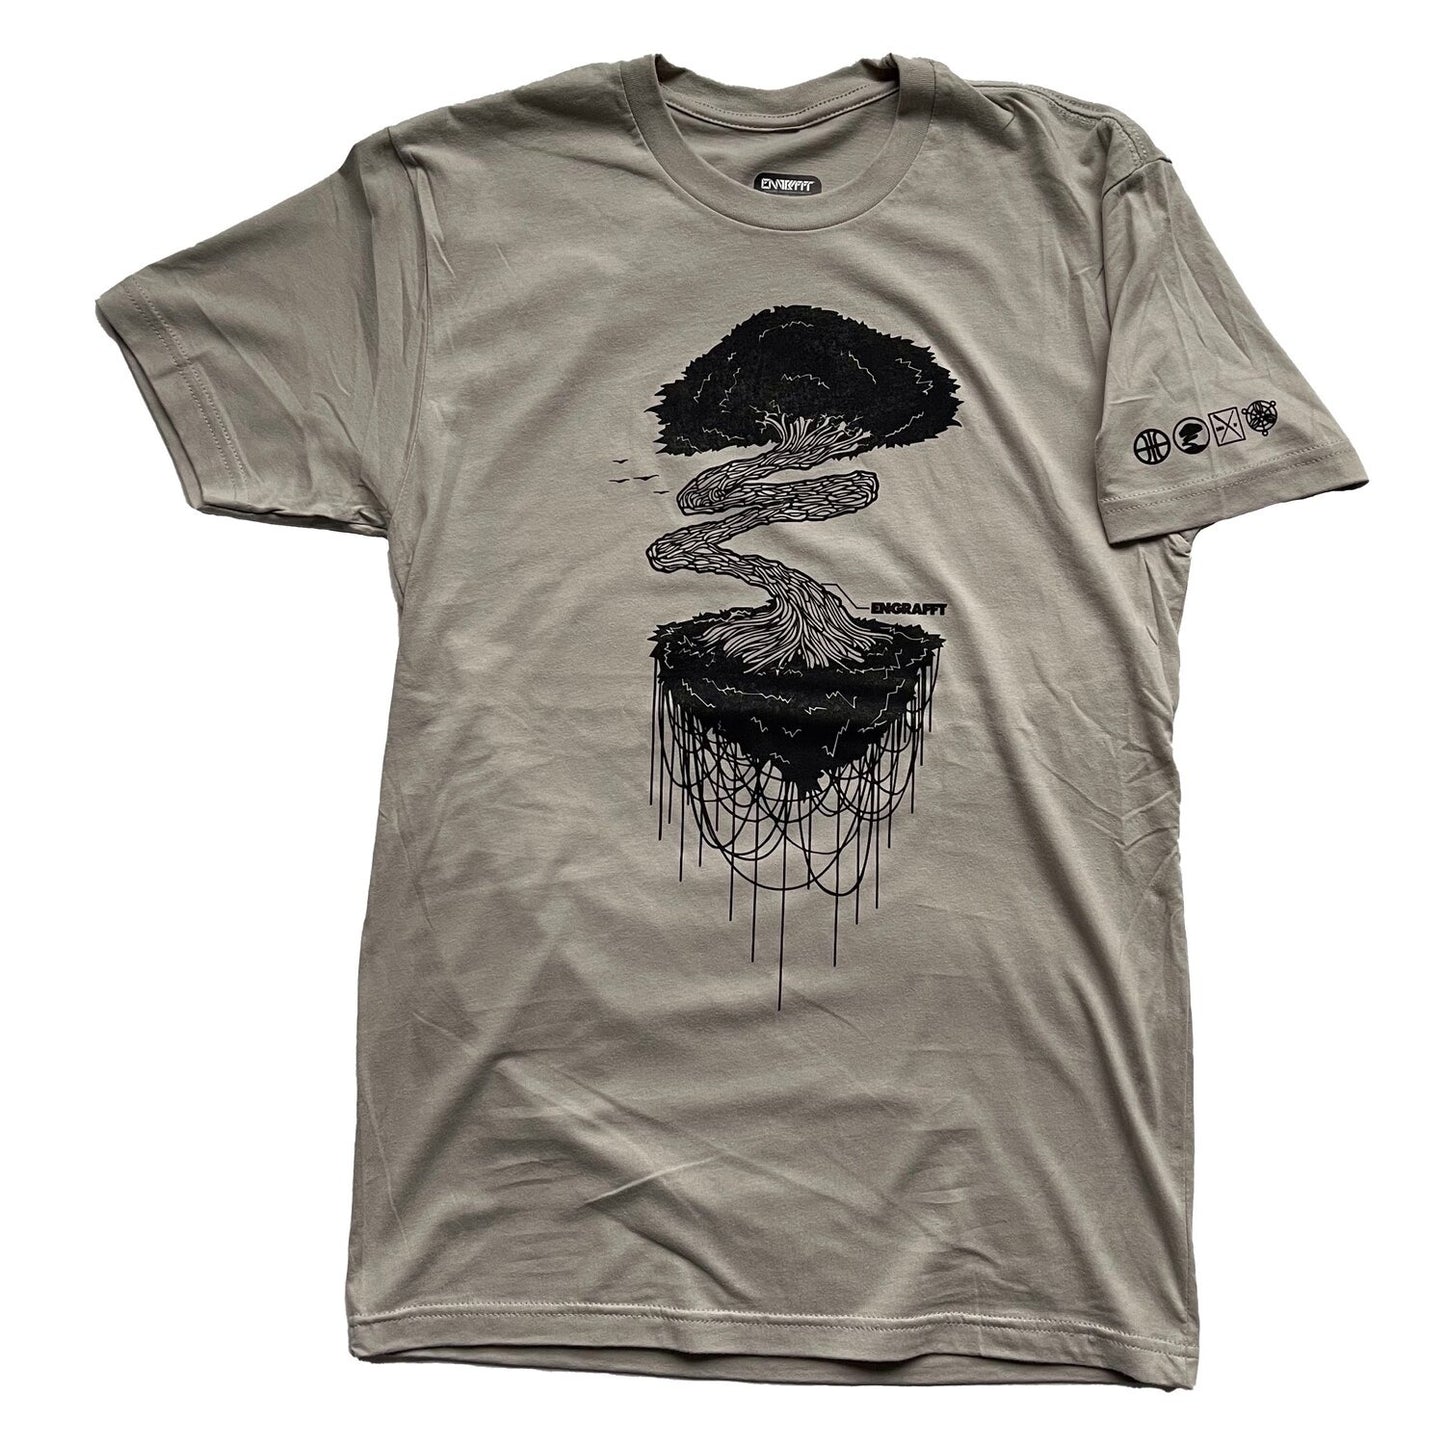 ENGRAFFT - The Grafted Tendril Bonsai 4 Tee